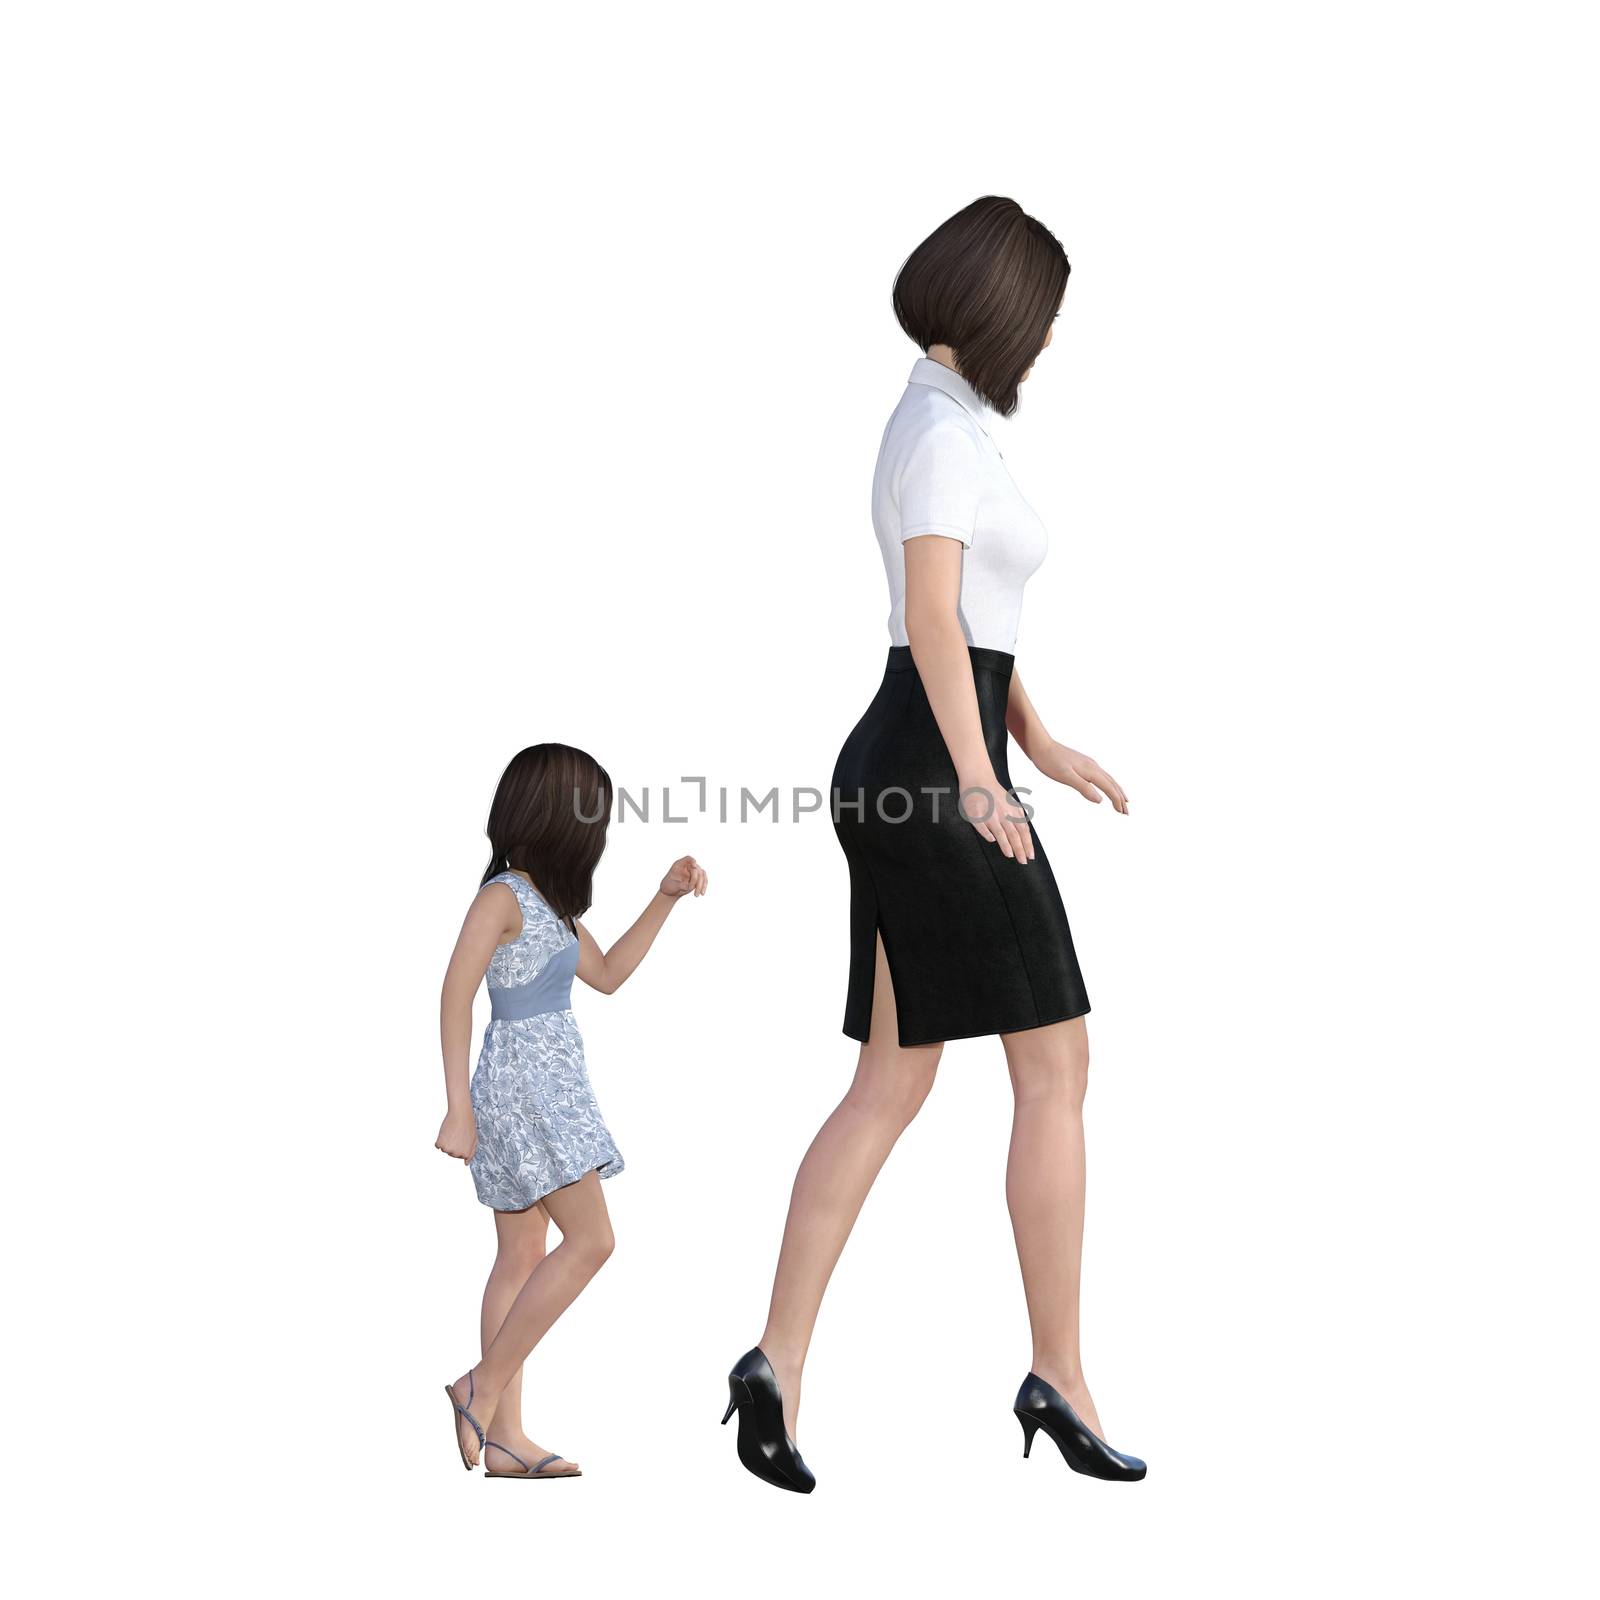 Mother Daughter Interaction of Girl Following Mom by kentoh